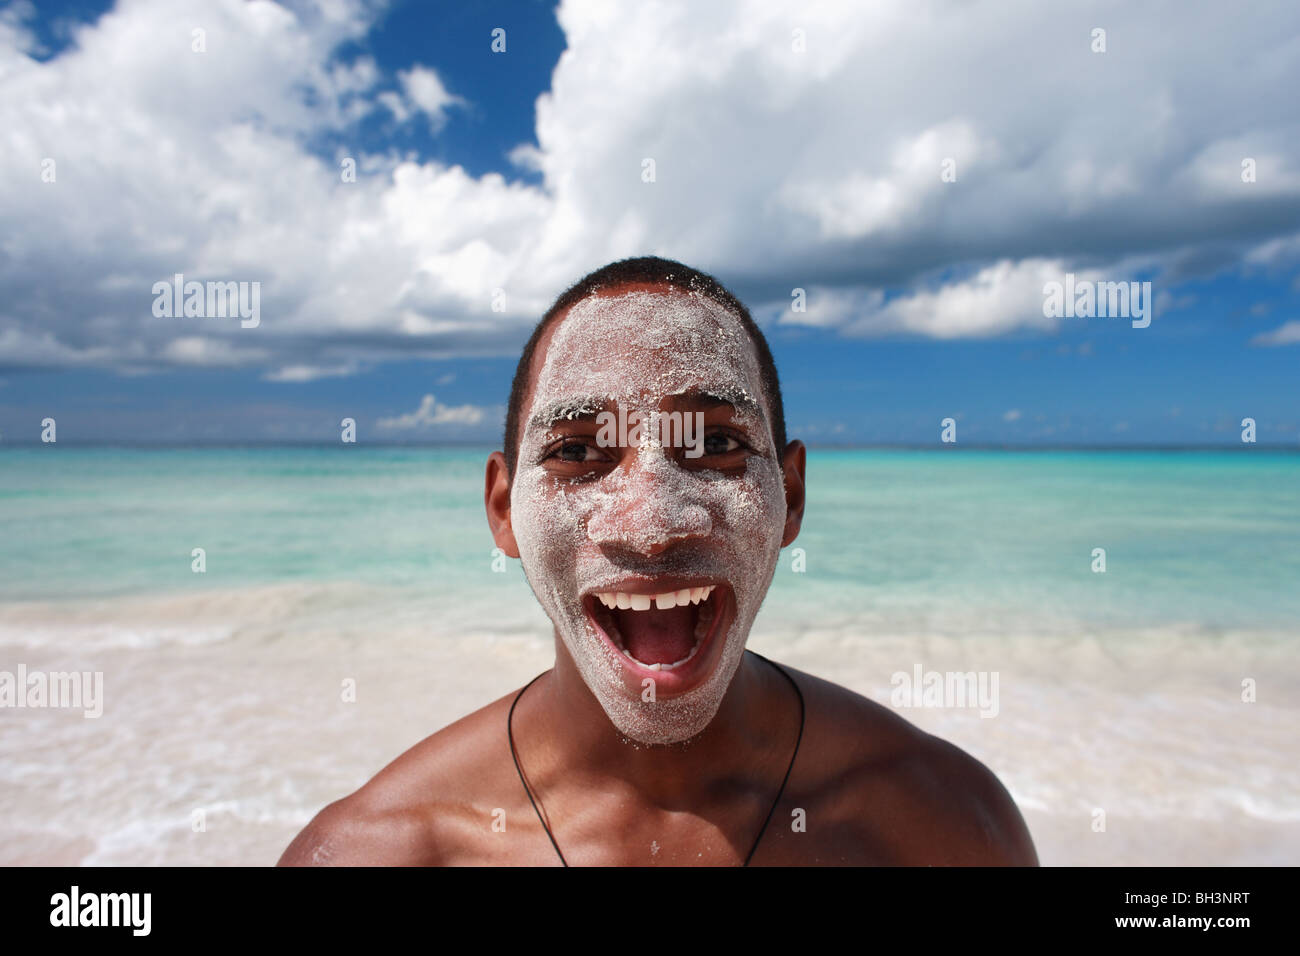 Young man on tropical beach with sand on his face, laughing Stock Photo